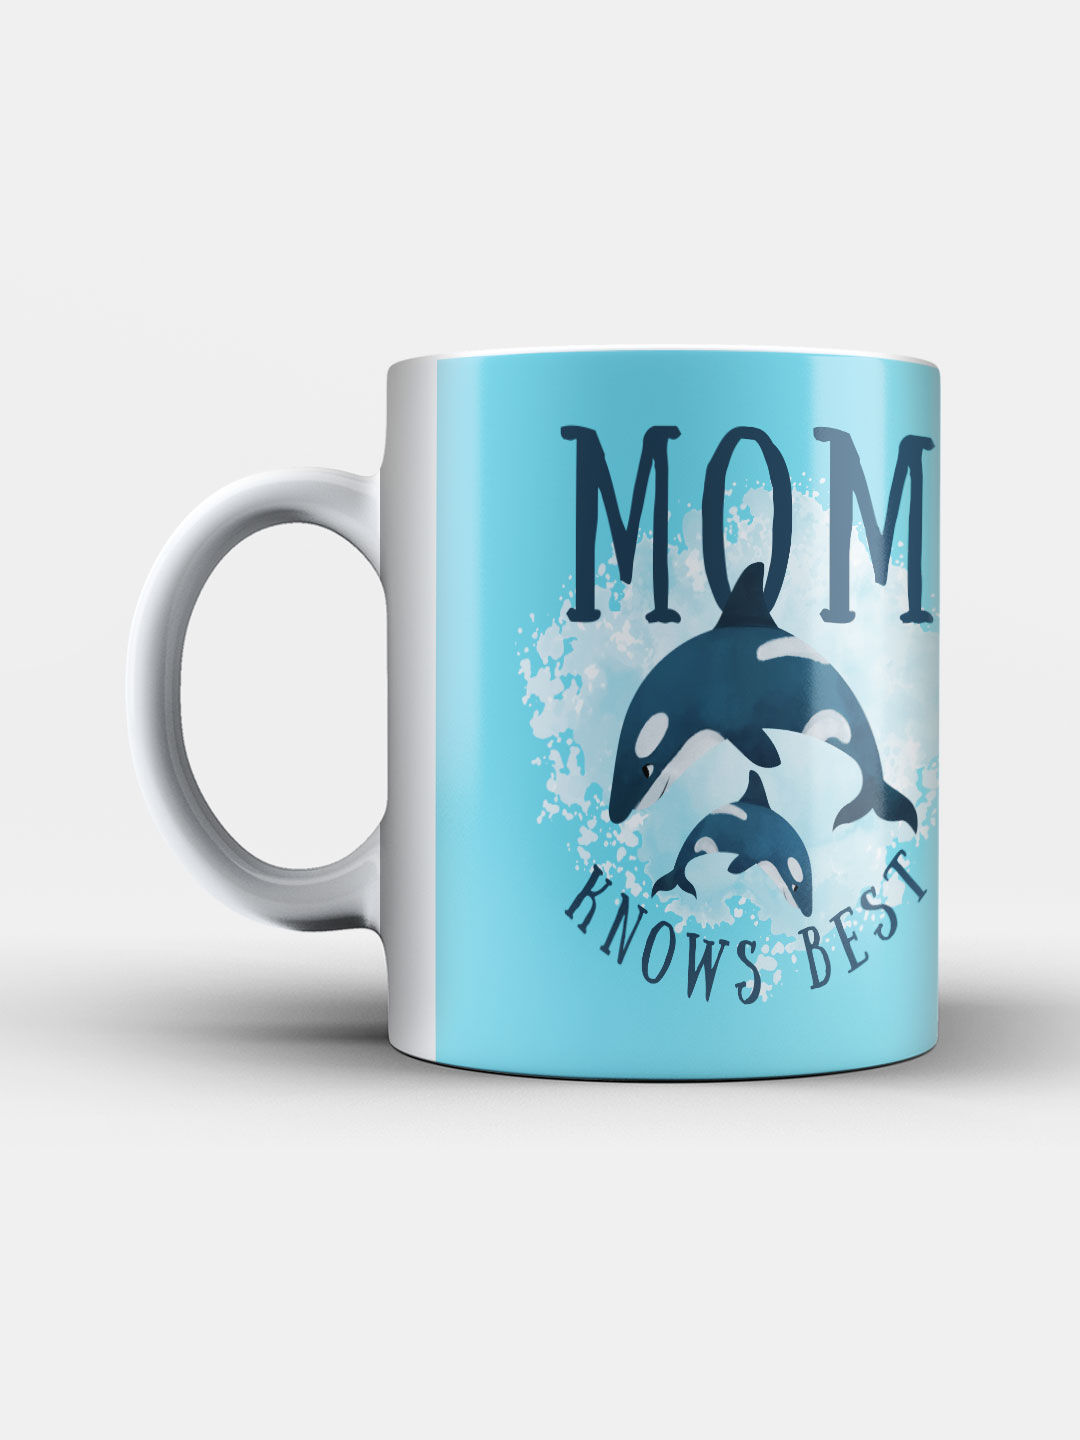 Buy Mom Birthday Gifts Keychain-As My Mom and Best Friend,Love